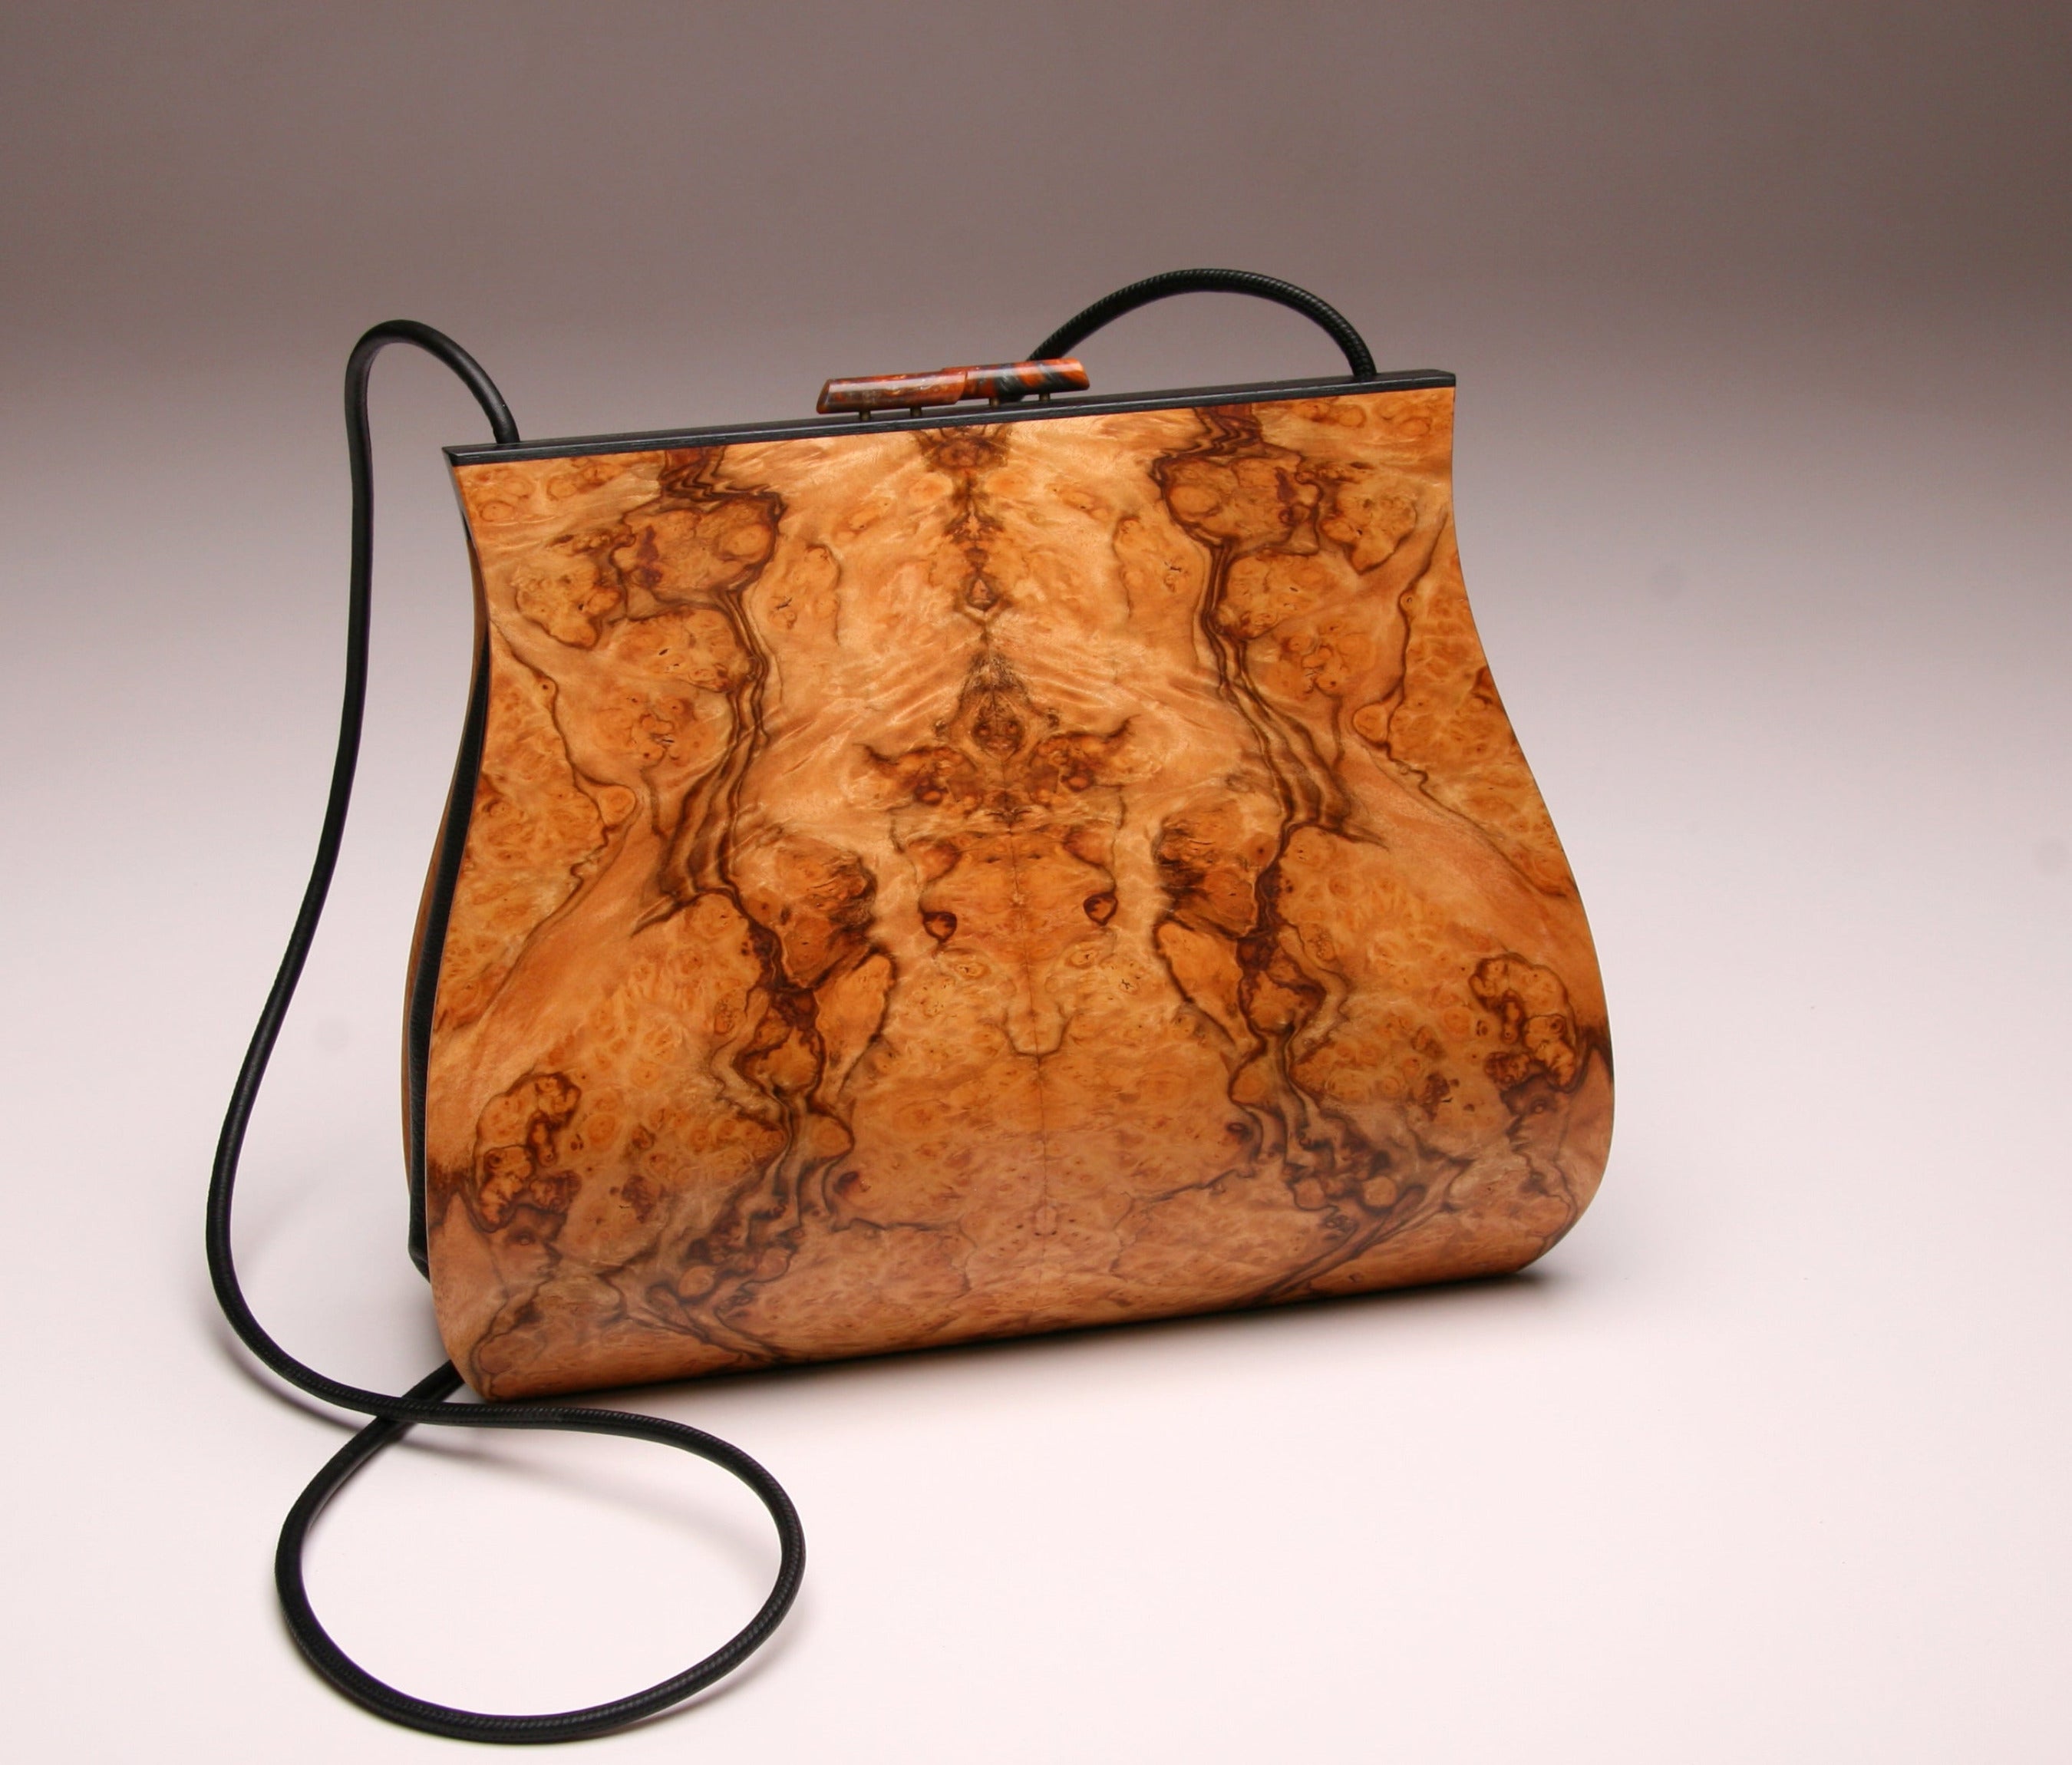 "Dianella" Large Handbag Single Strap in Book-Matched Pepperwood Burl (Only 2 in stock!)